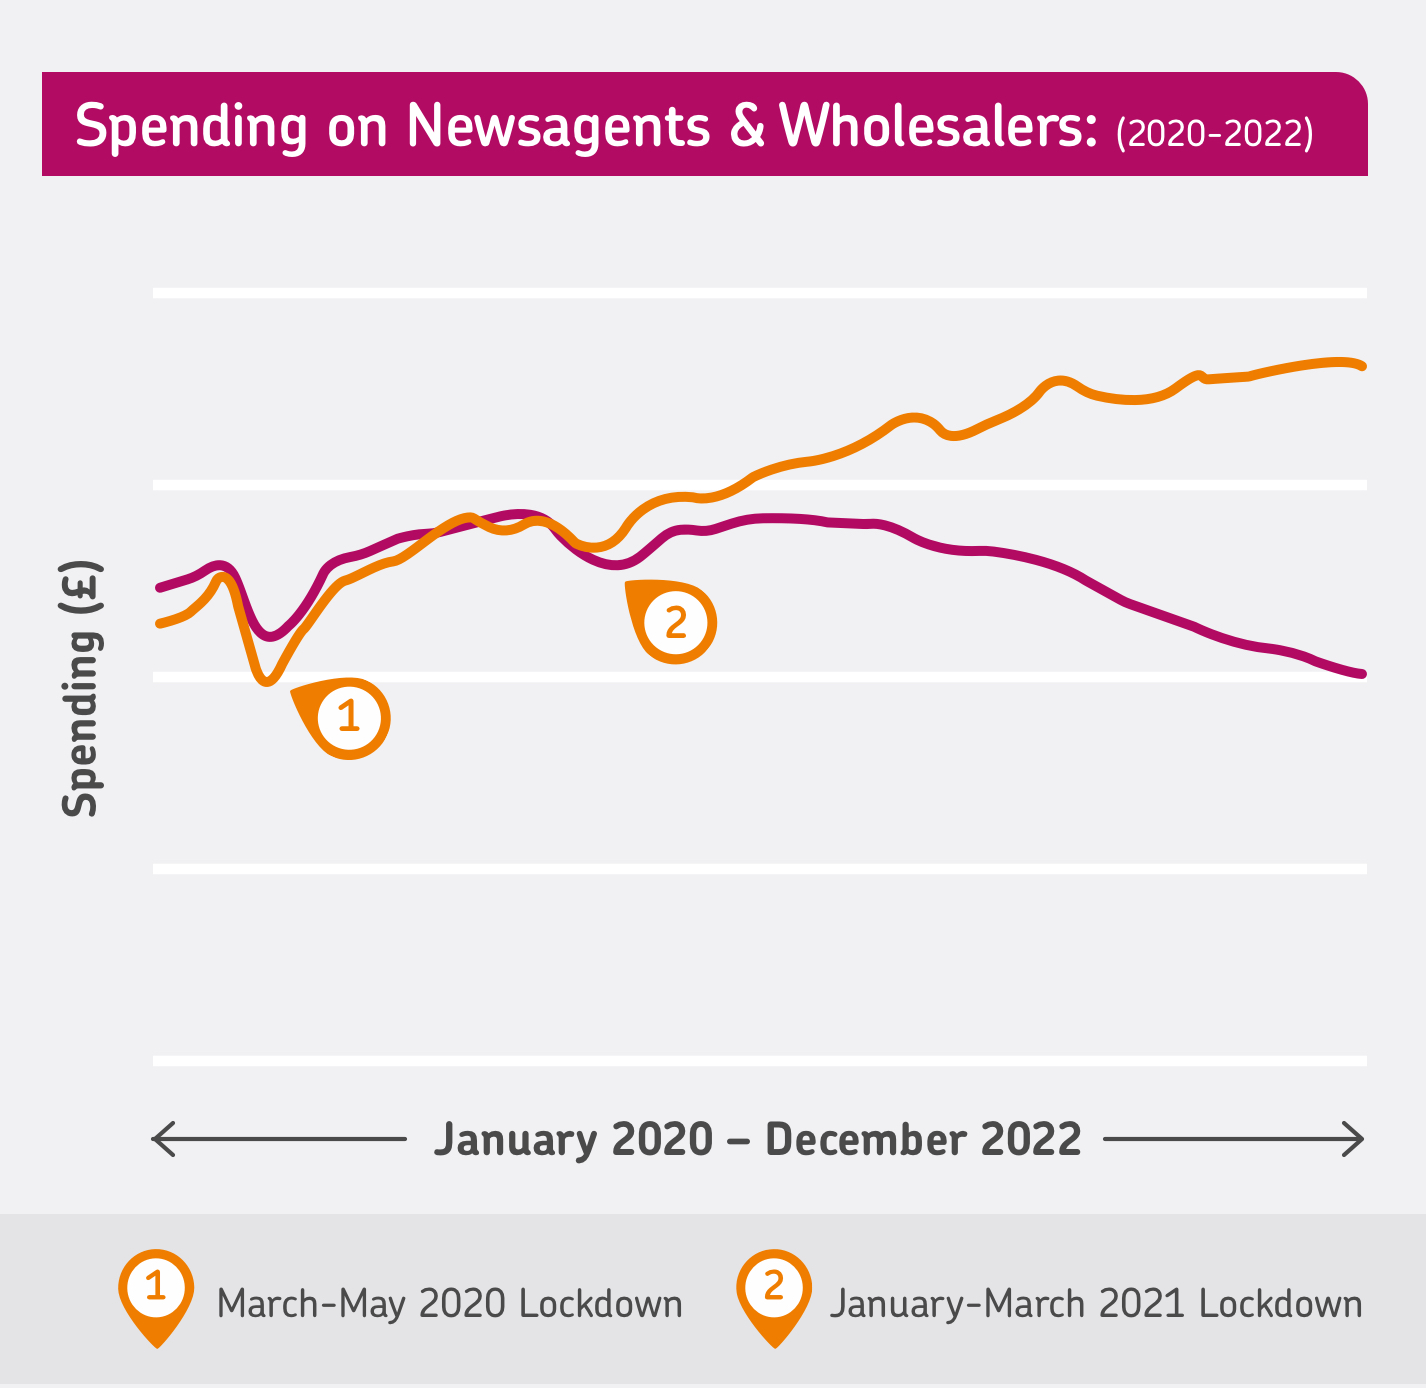 Graph comparing UK consumer spending in newsagents vs wholesalers from January 2020 to December 2022